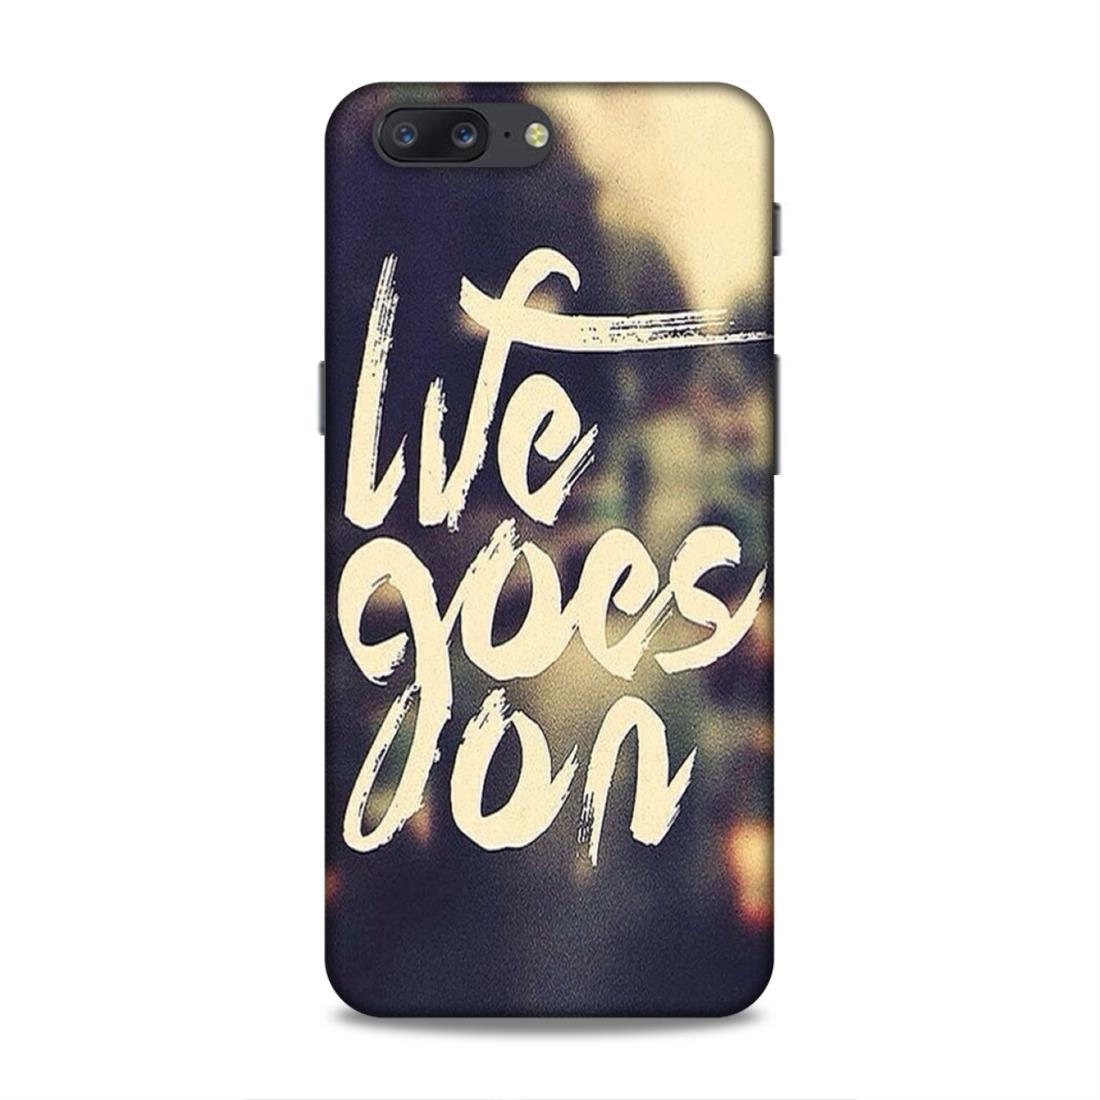 Life Goes On OnePlus 5 Mobile Cover Case